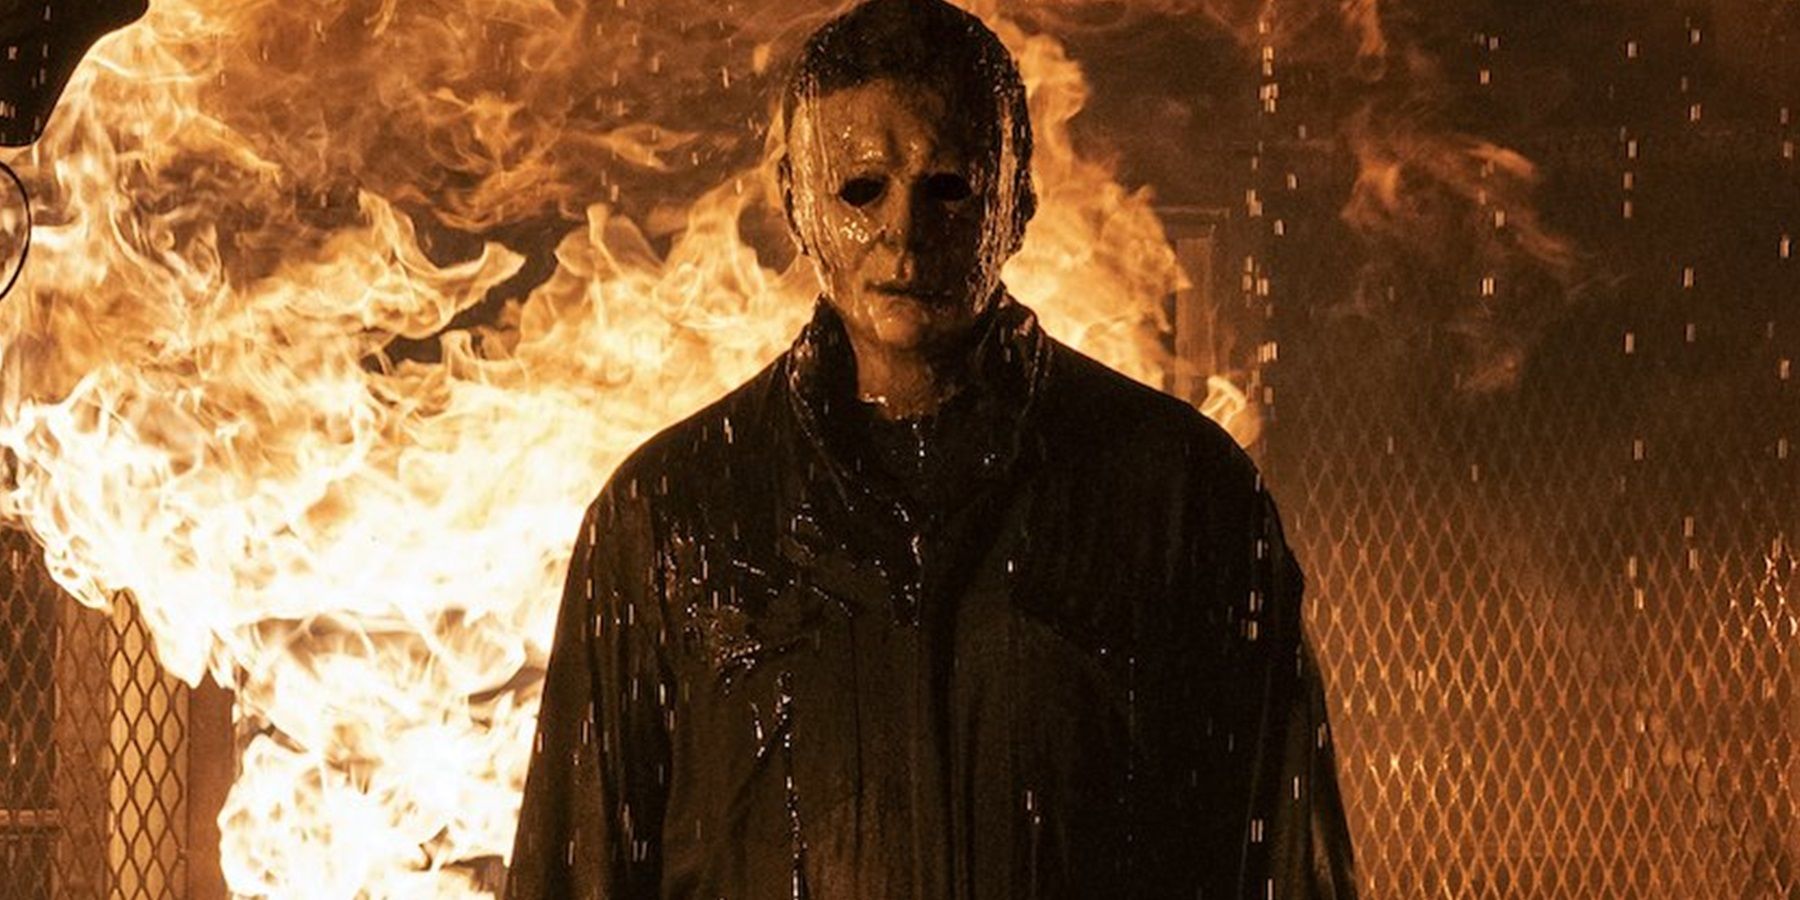 Michael Myers emerges from a burning house in Halloween Kills